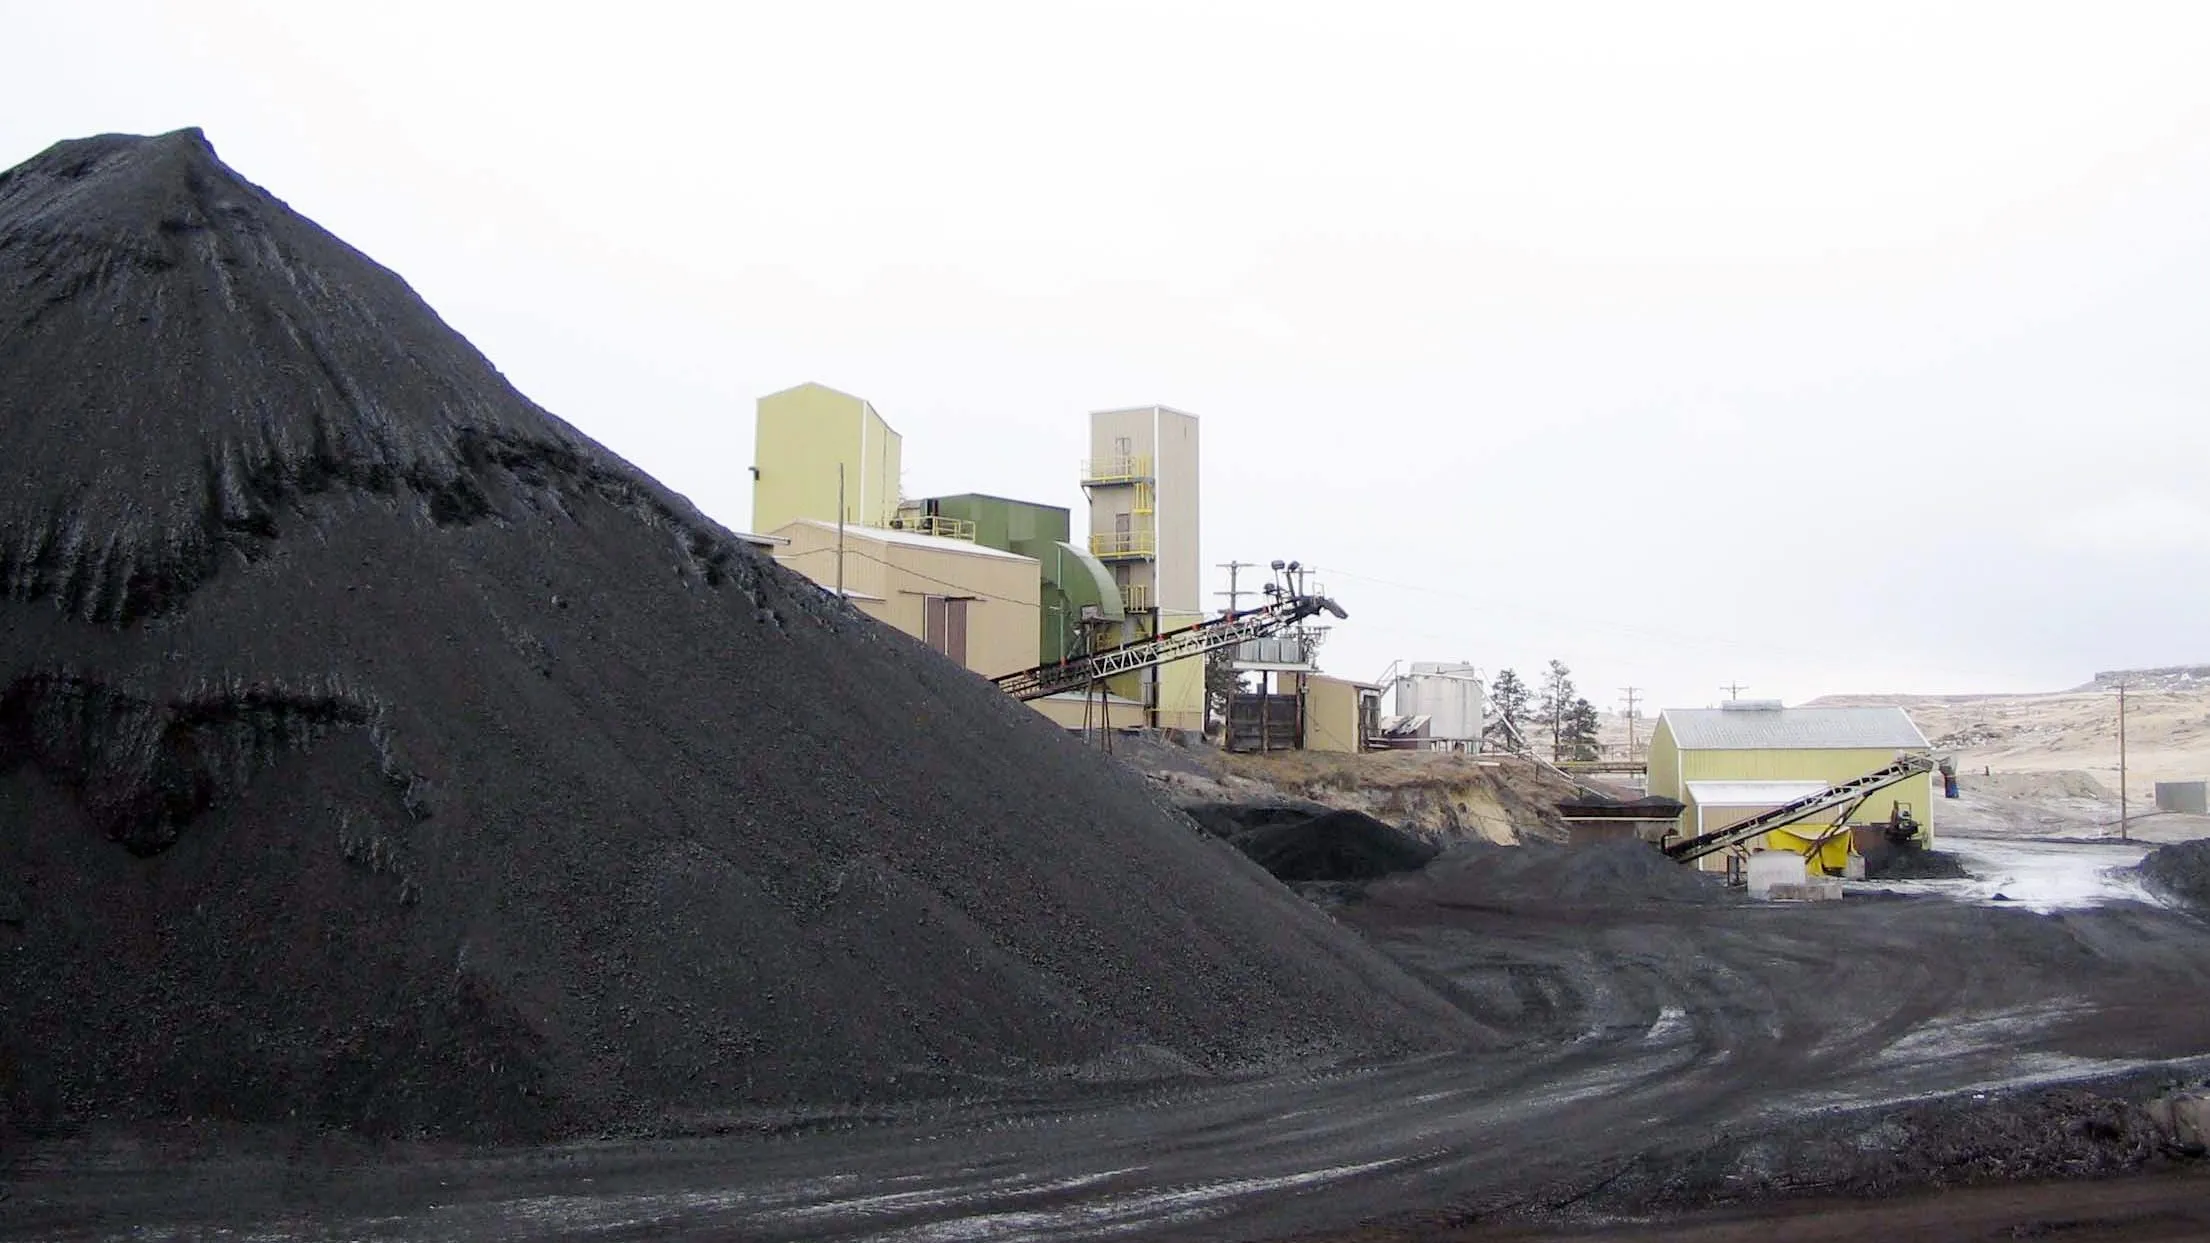 The volume of coal burned in the USA will increase this year